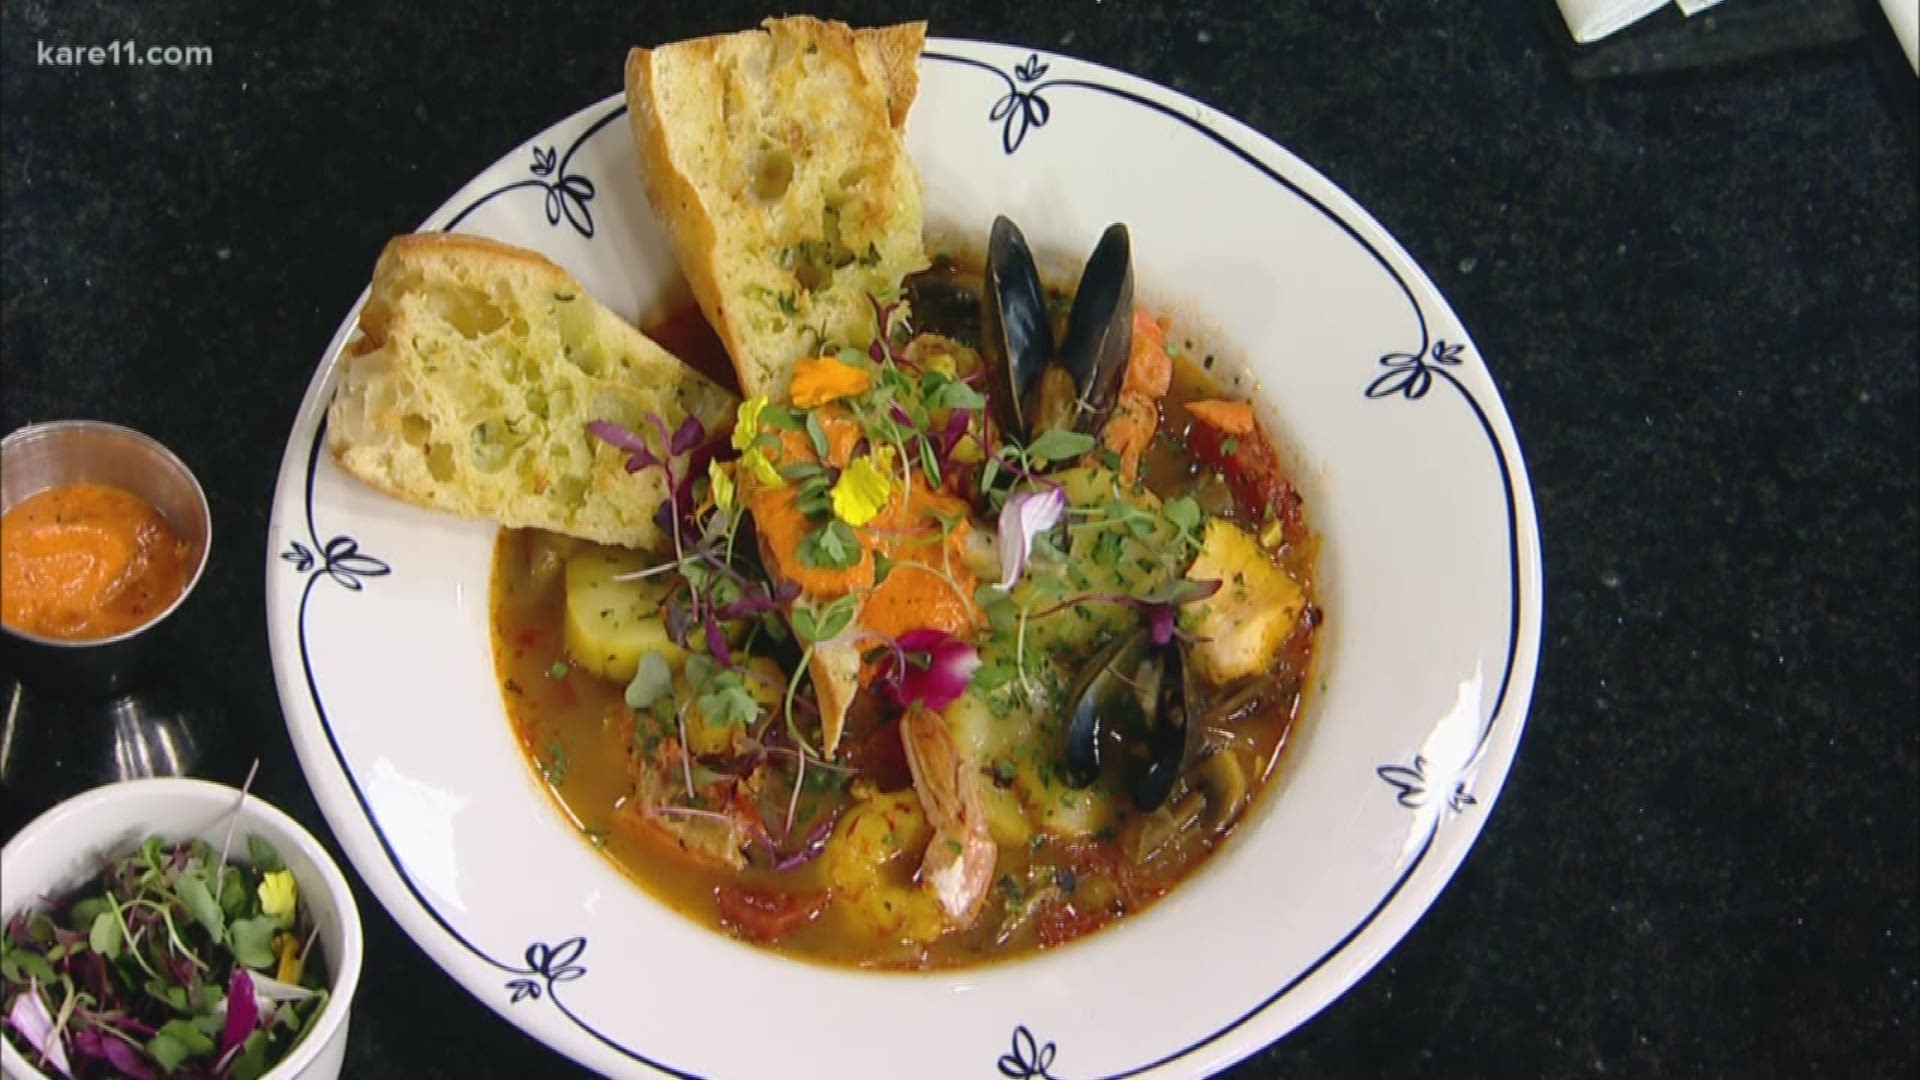 Tria is here to demonstrate their seafood bouillabaise recipe in honor of their Bastille Day celebration.